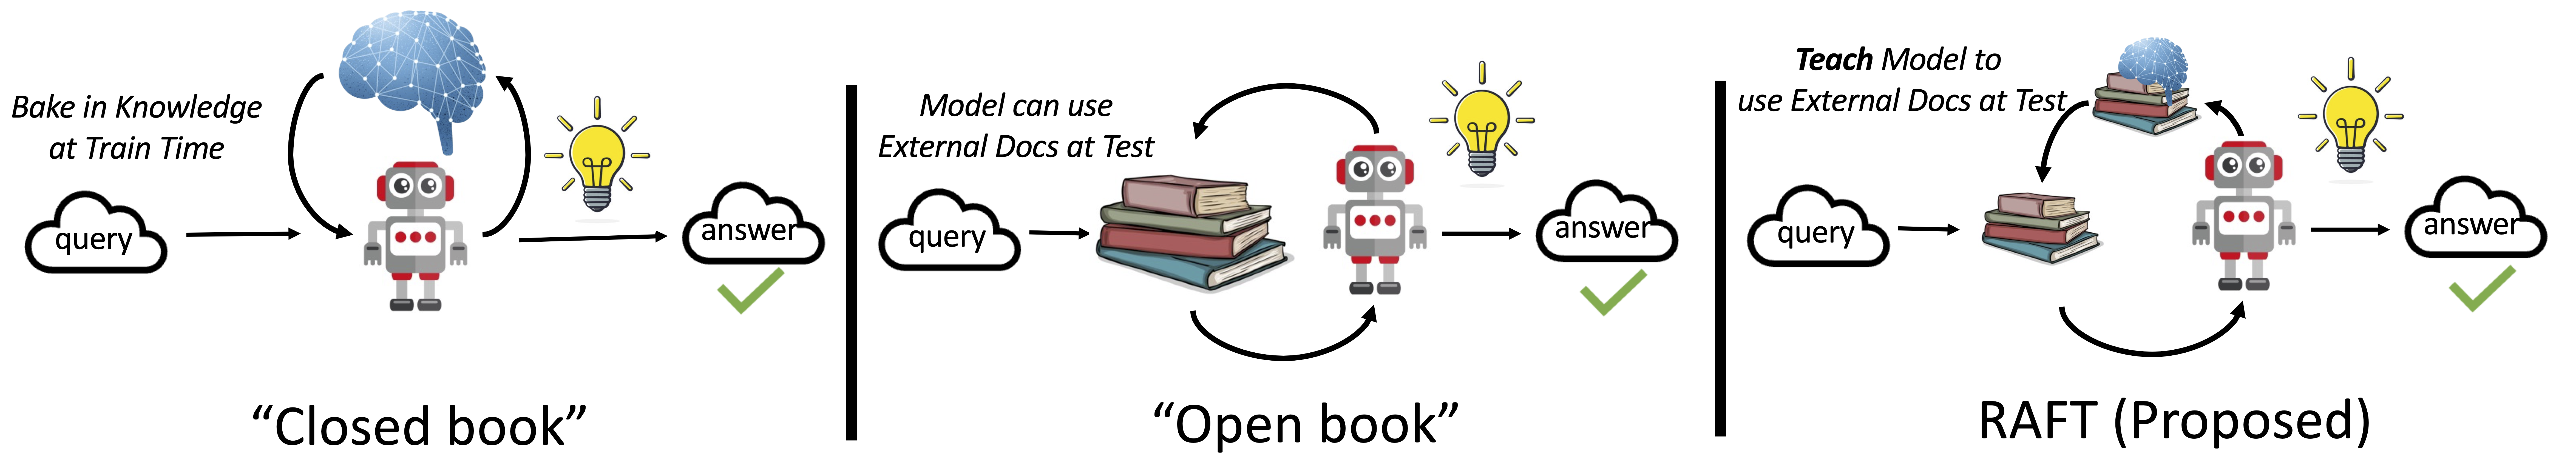 RAFT analogy to open-book